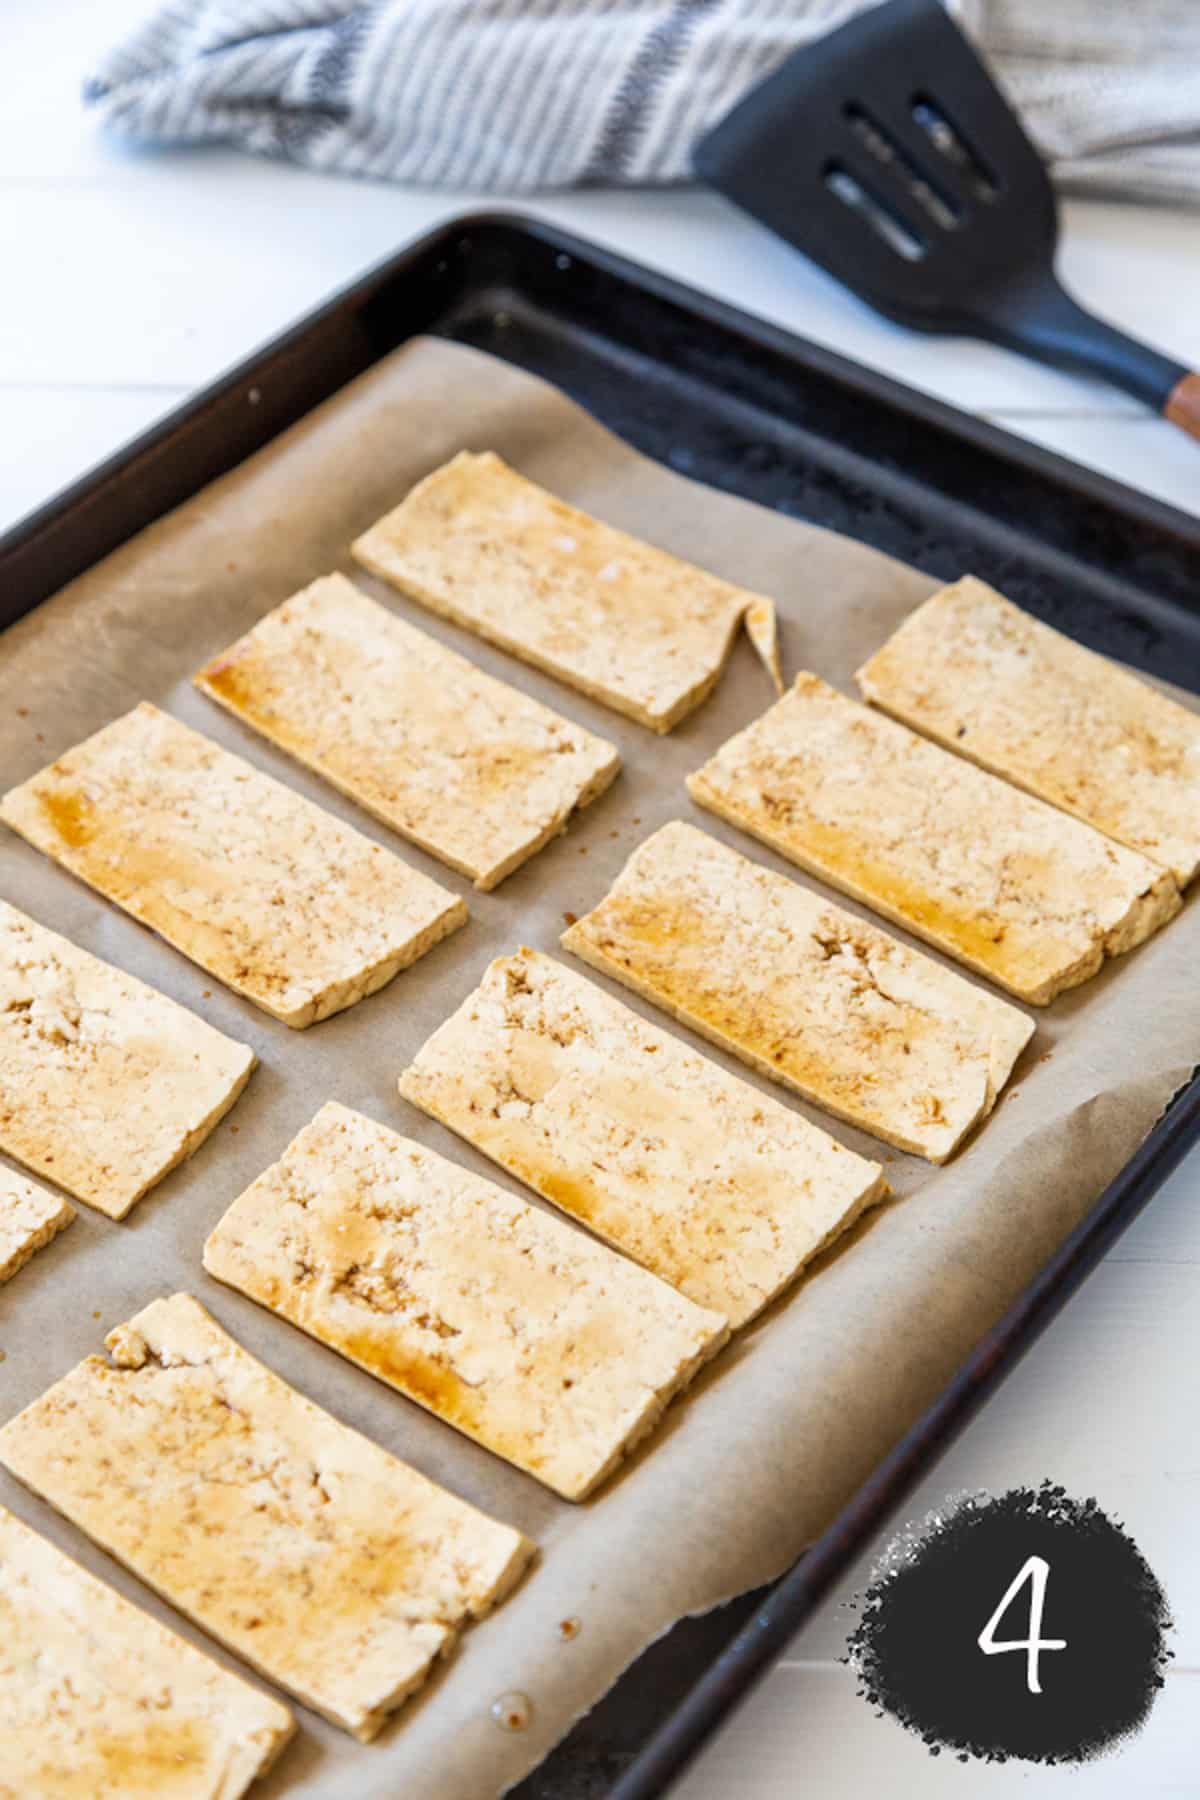 Thinly sliced tofu soaked in soy sauce on a parchment lined baking sheet.